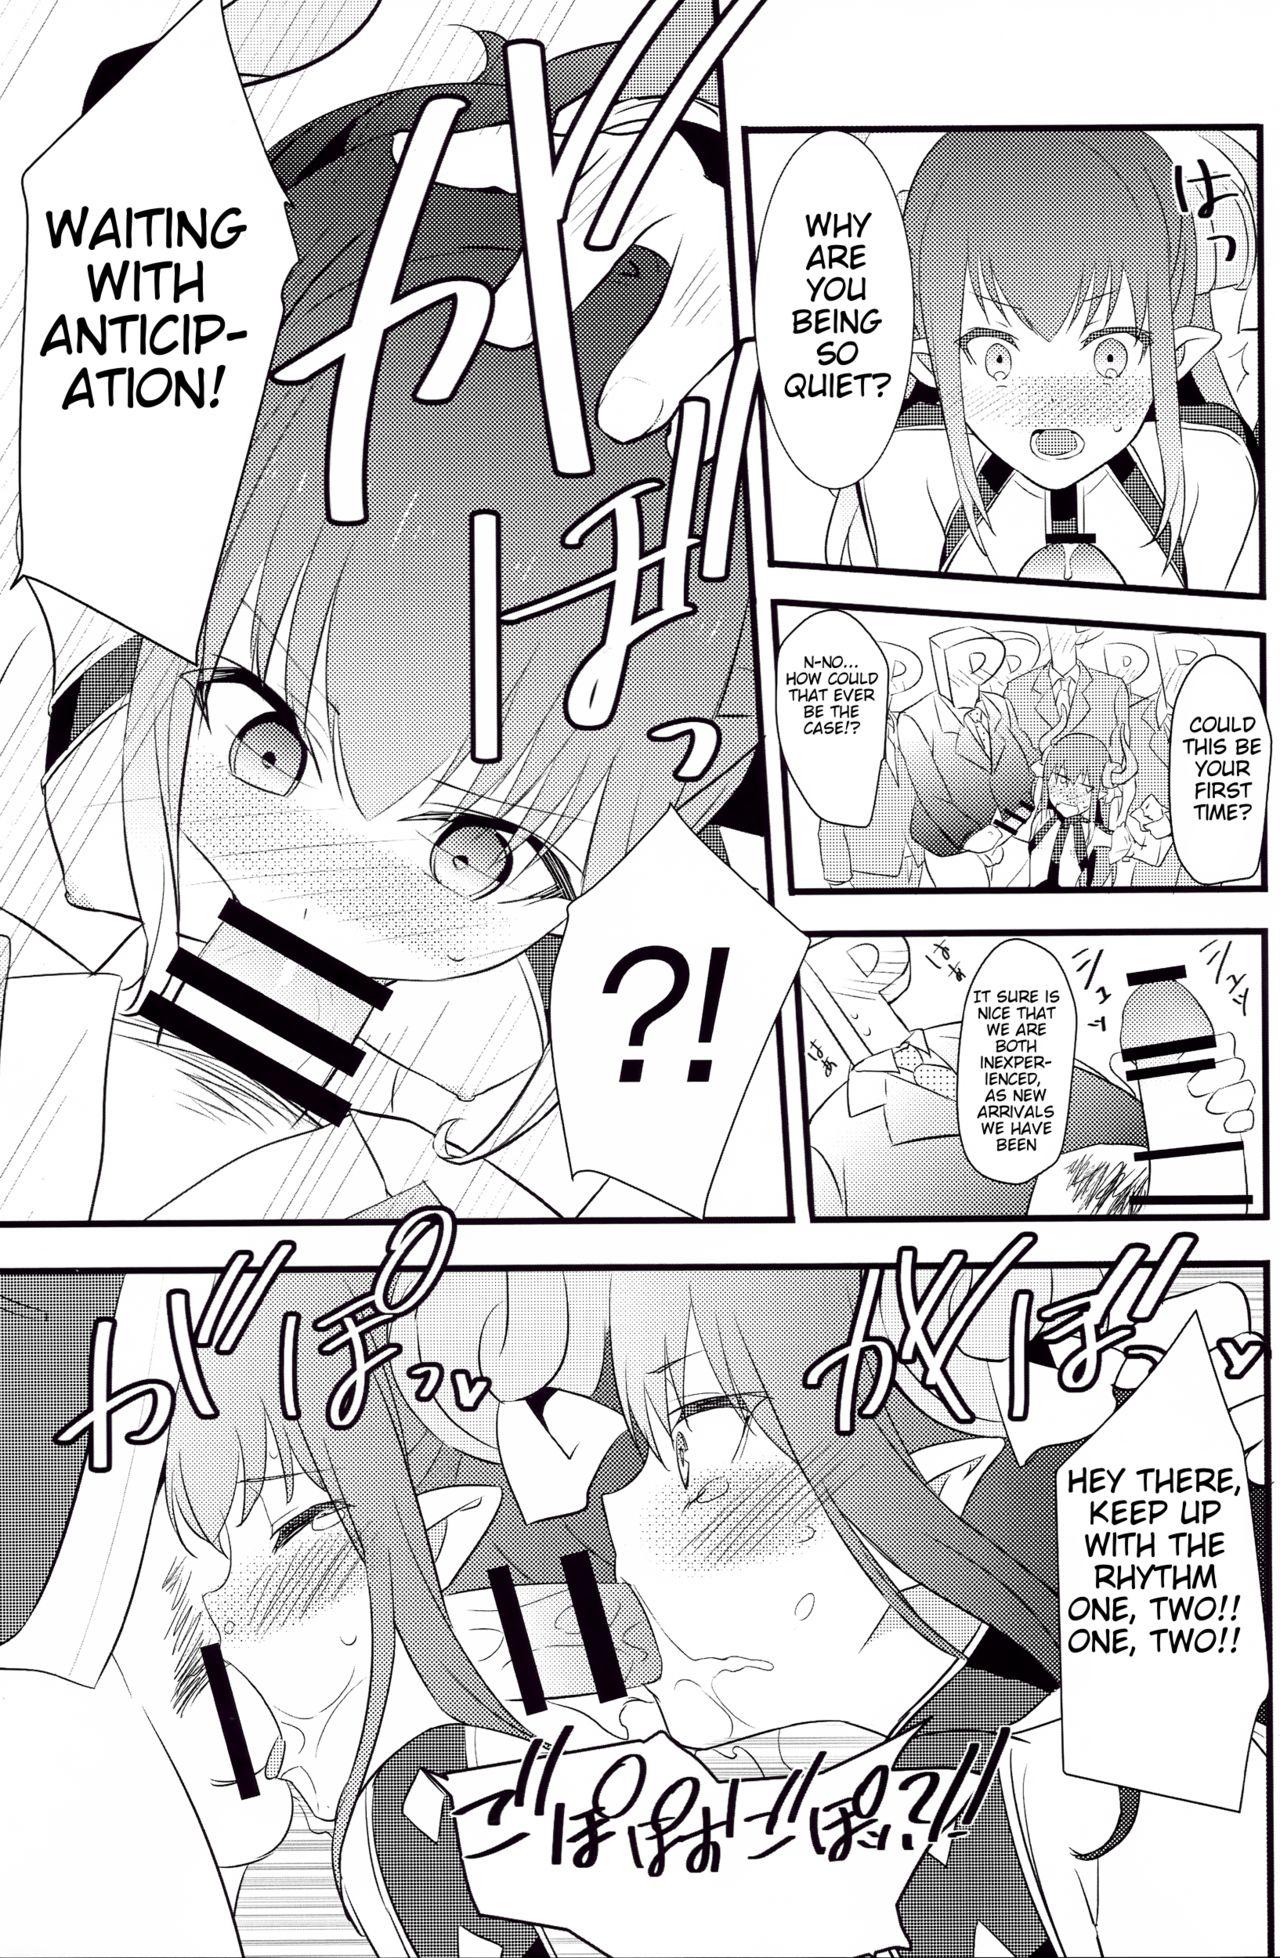 Blowing The IDOL SERVANT - Fate grand order Guys - Page 11